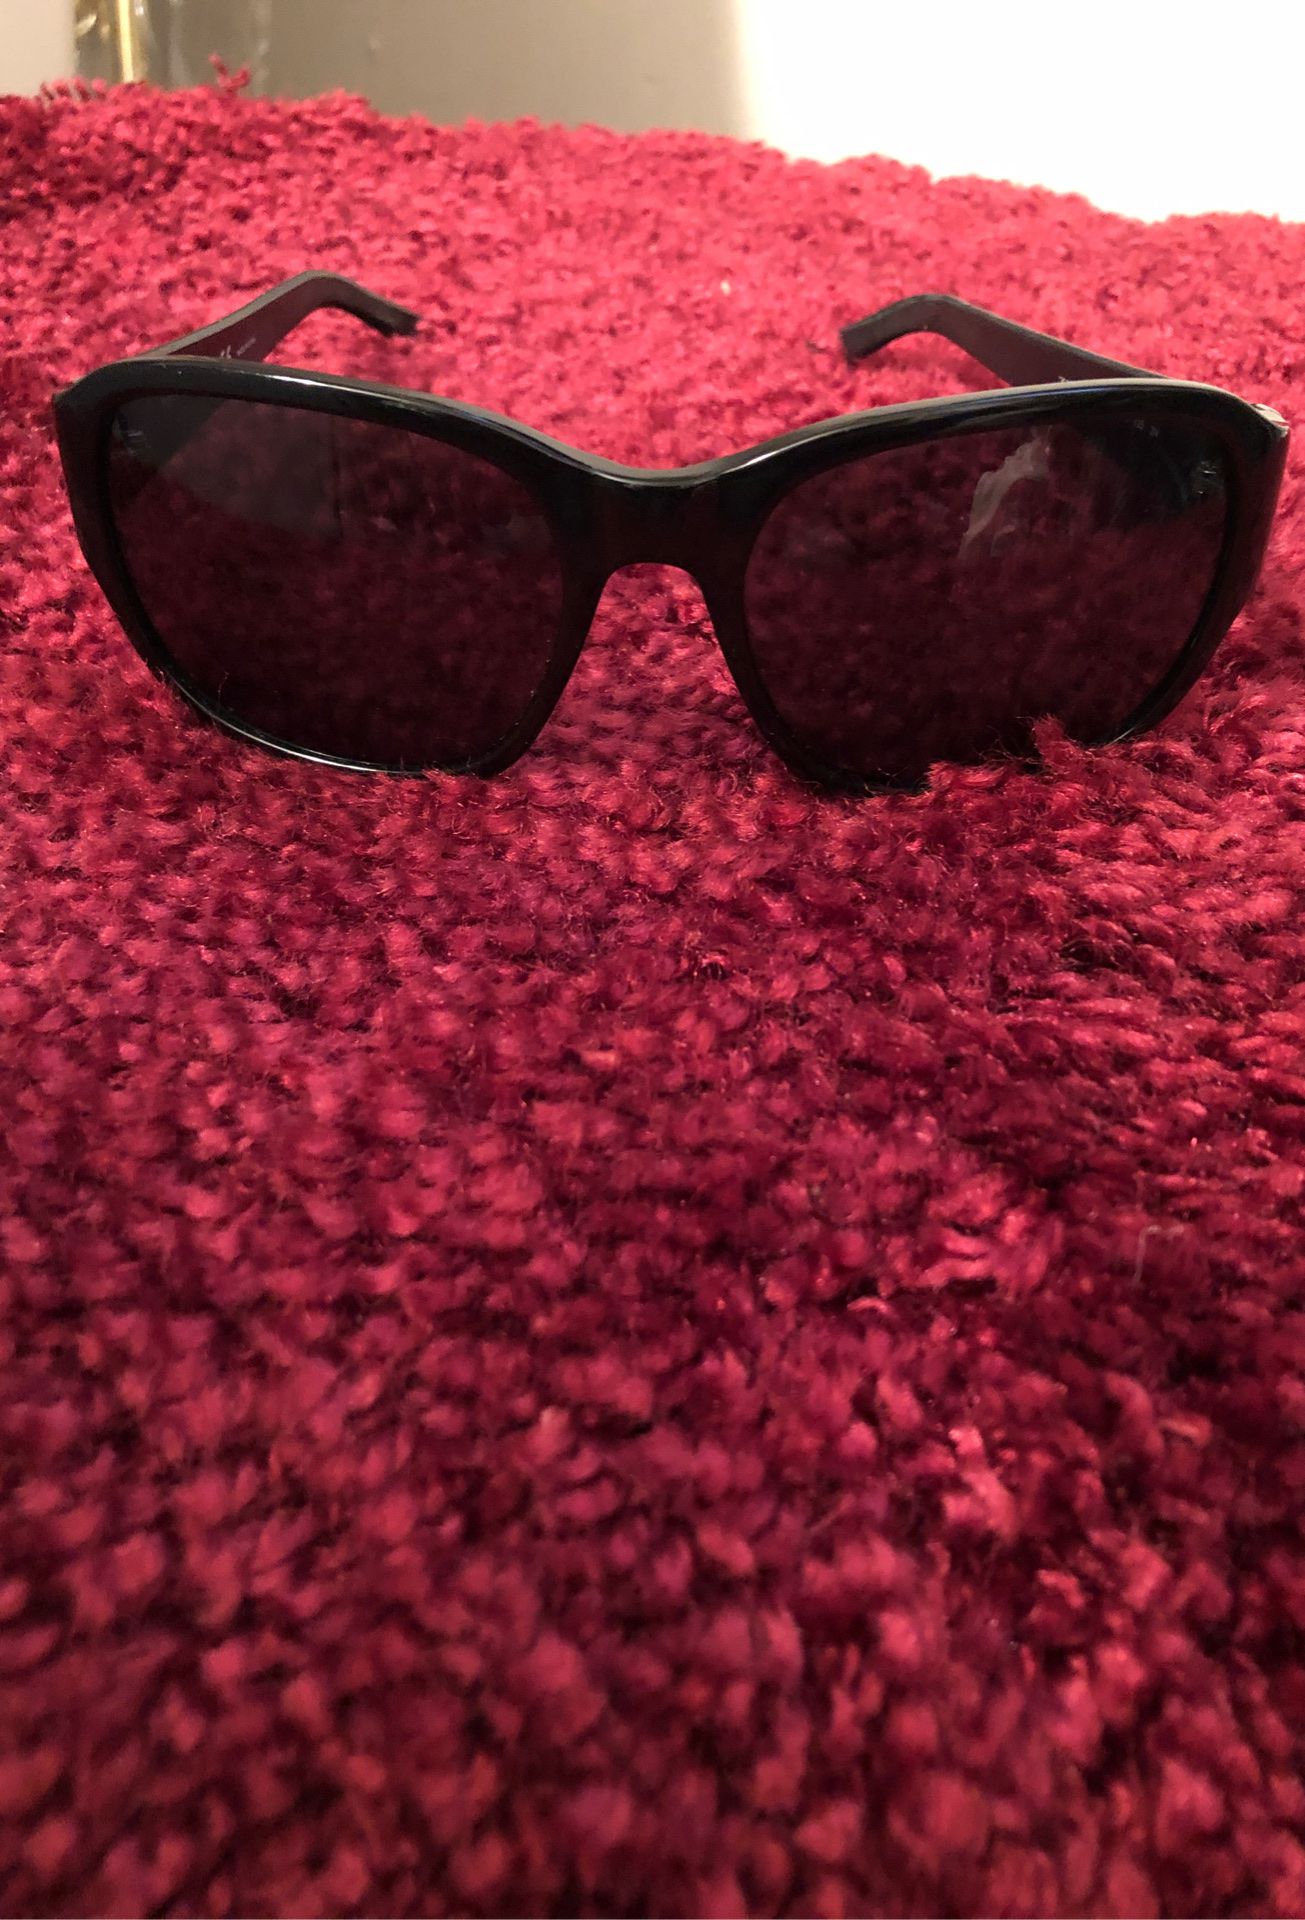 TORY BURCH AUTHENTIC SUNGLASSES W/LEATHER ARMS